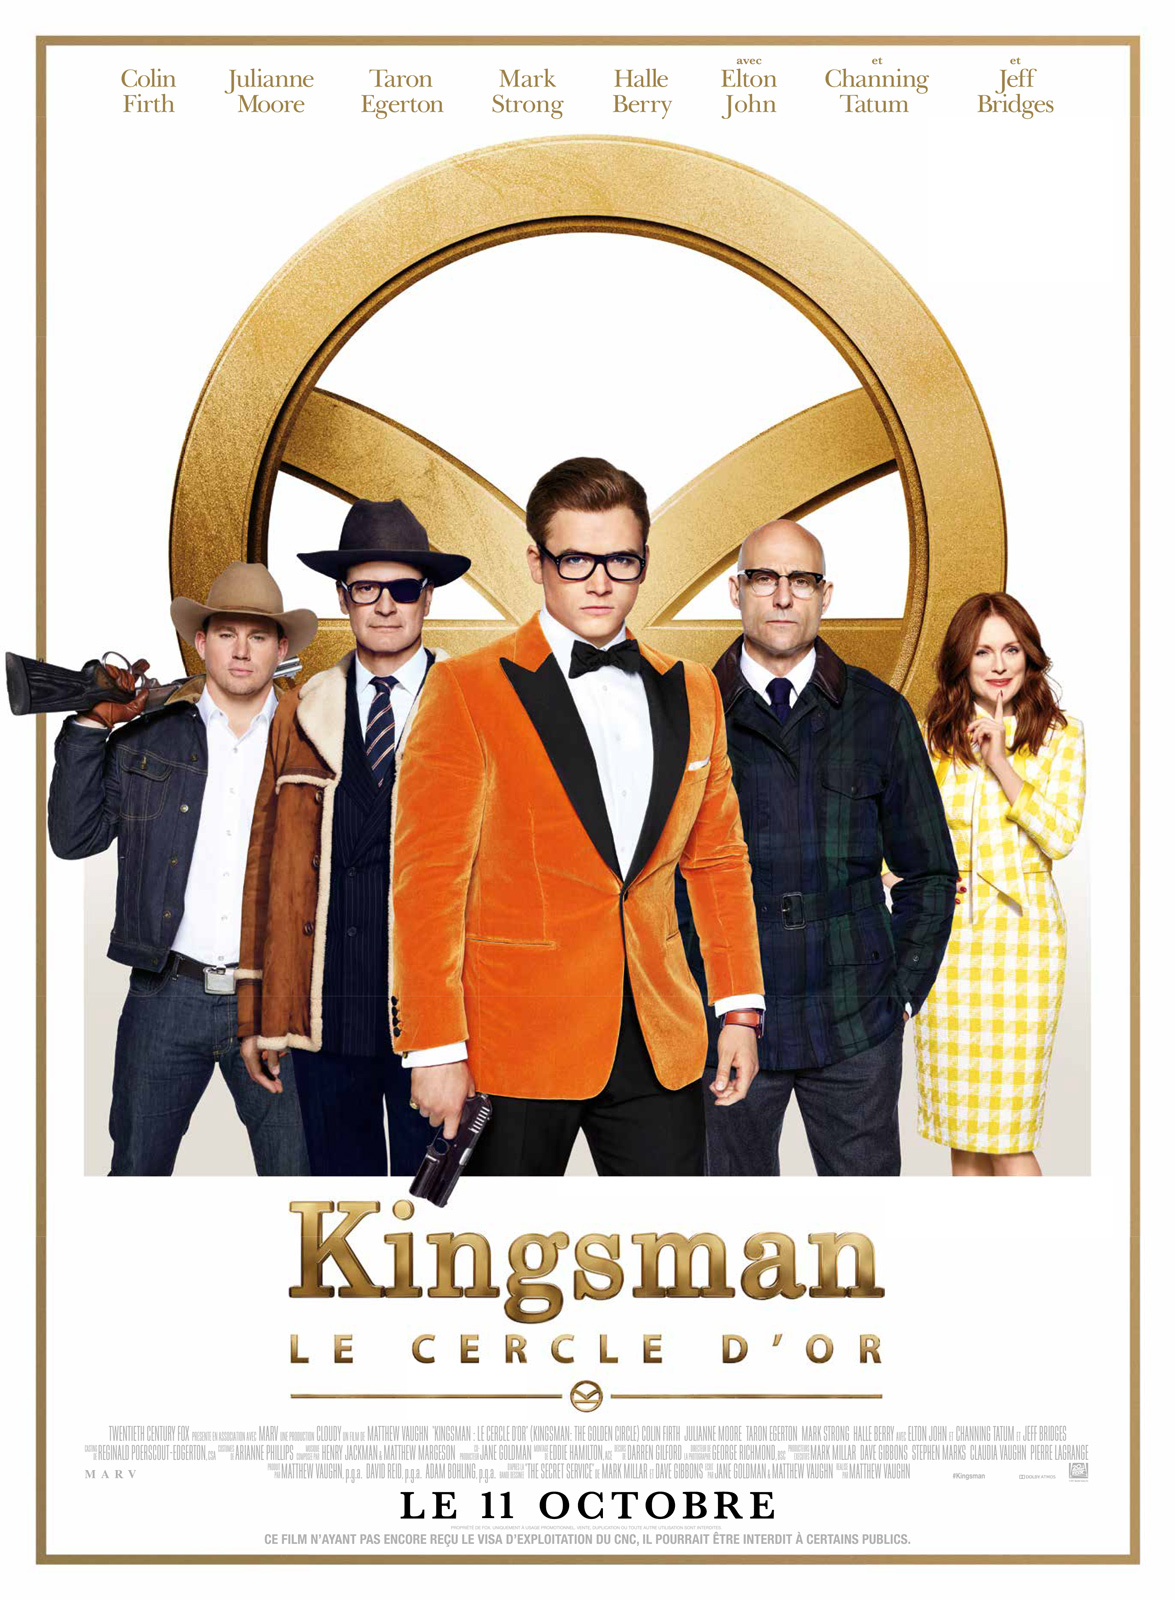 Kingsman : Le Cercle d'or FRENCH BluRay 1080p 2017